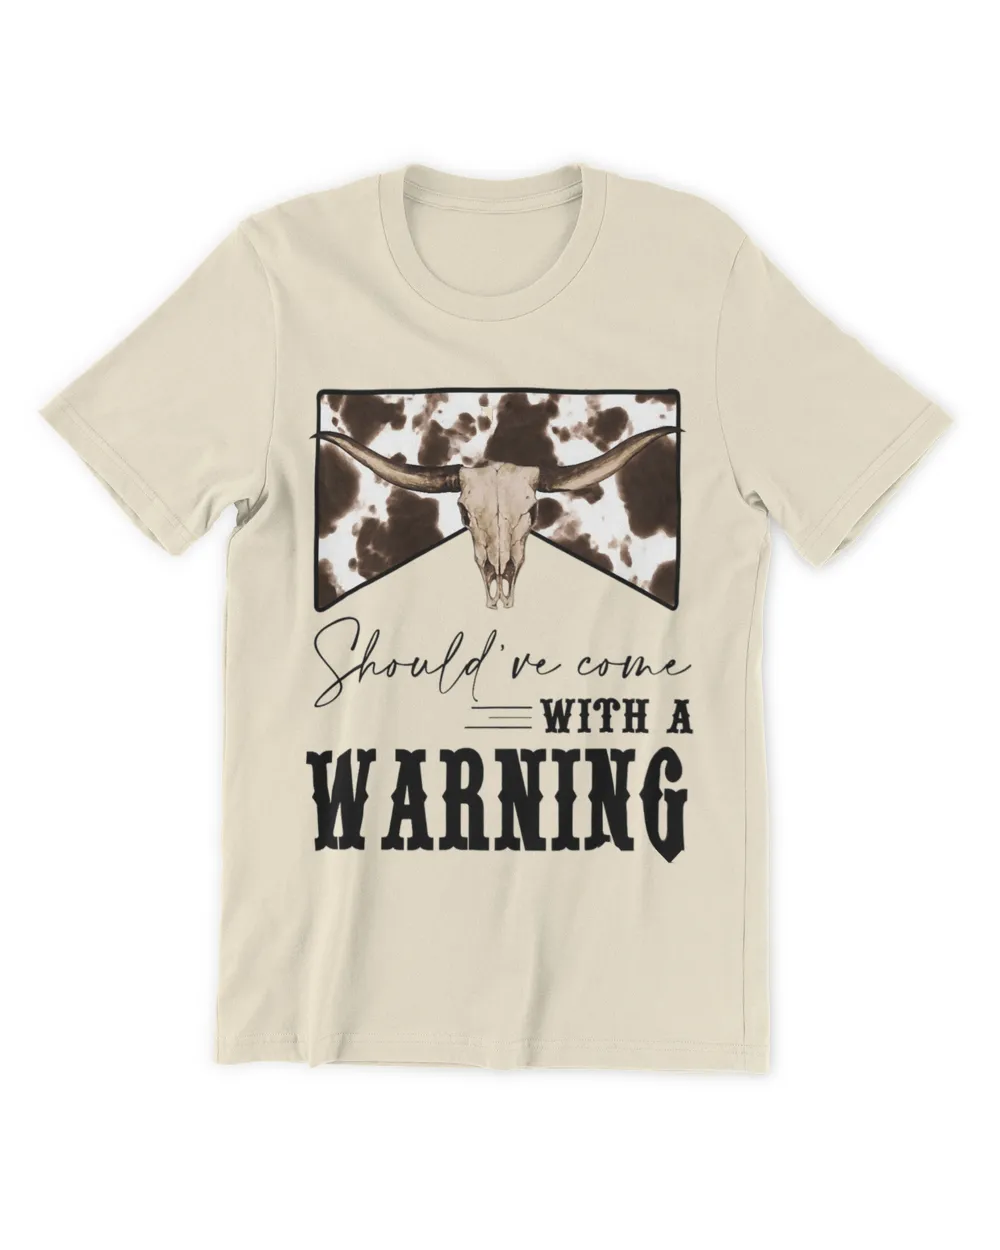 Cow print Cowhide Bull Skull Shouldve Come With A Warning